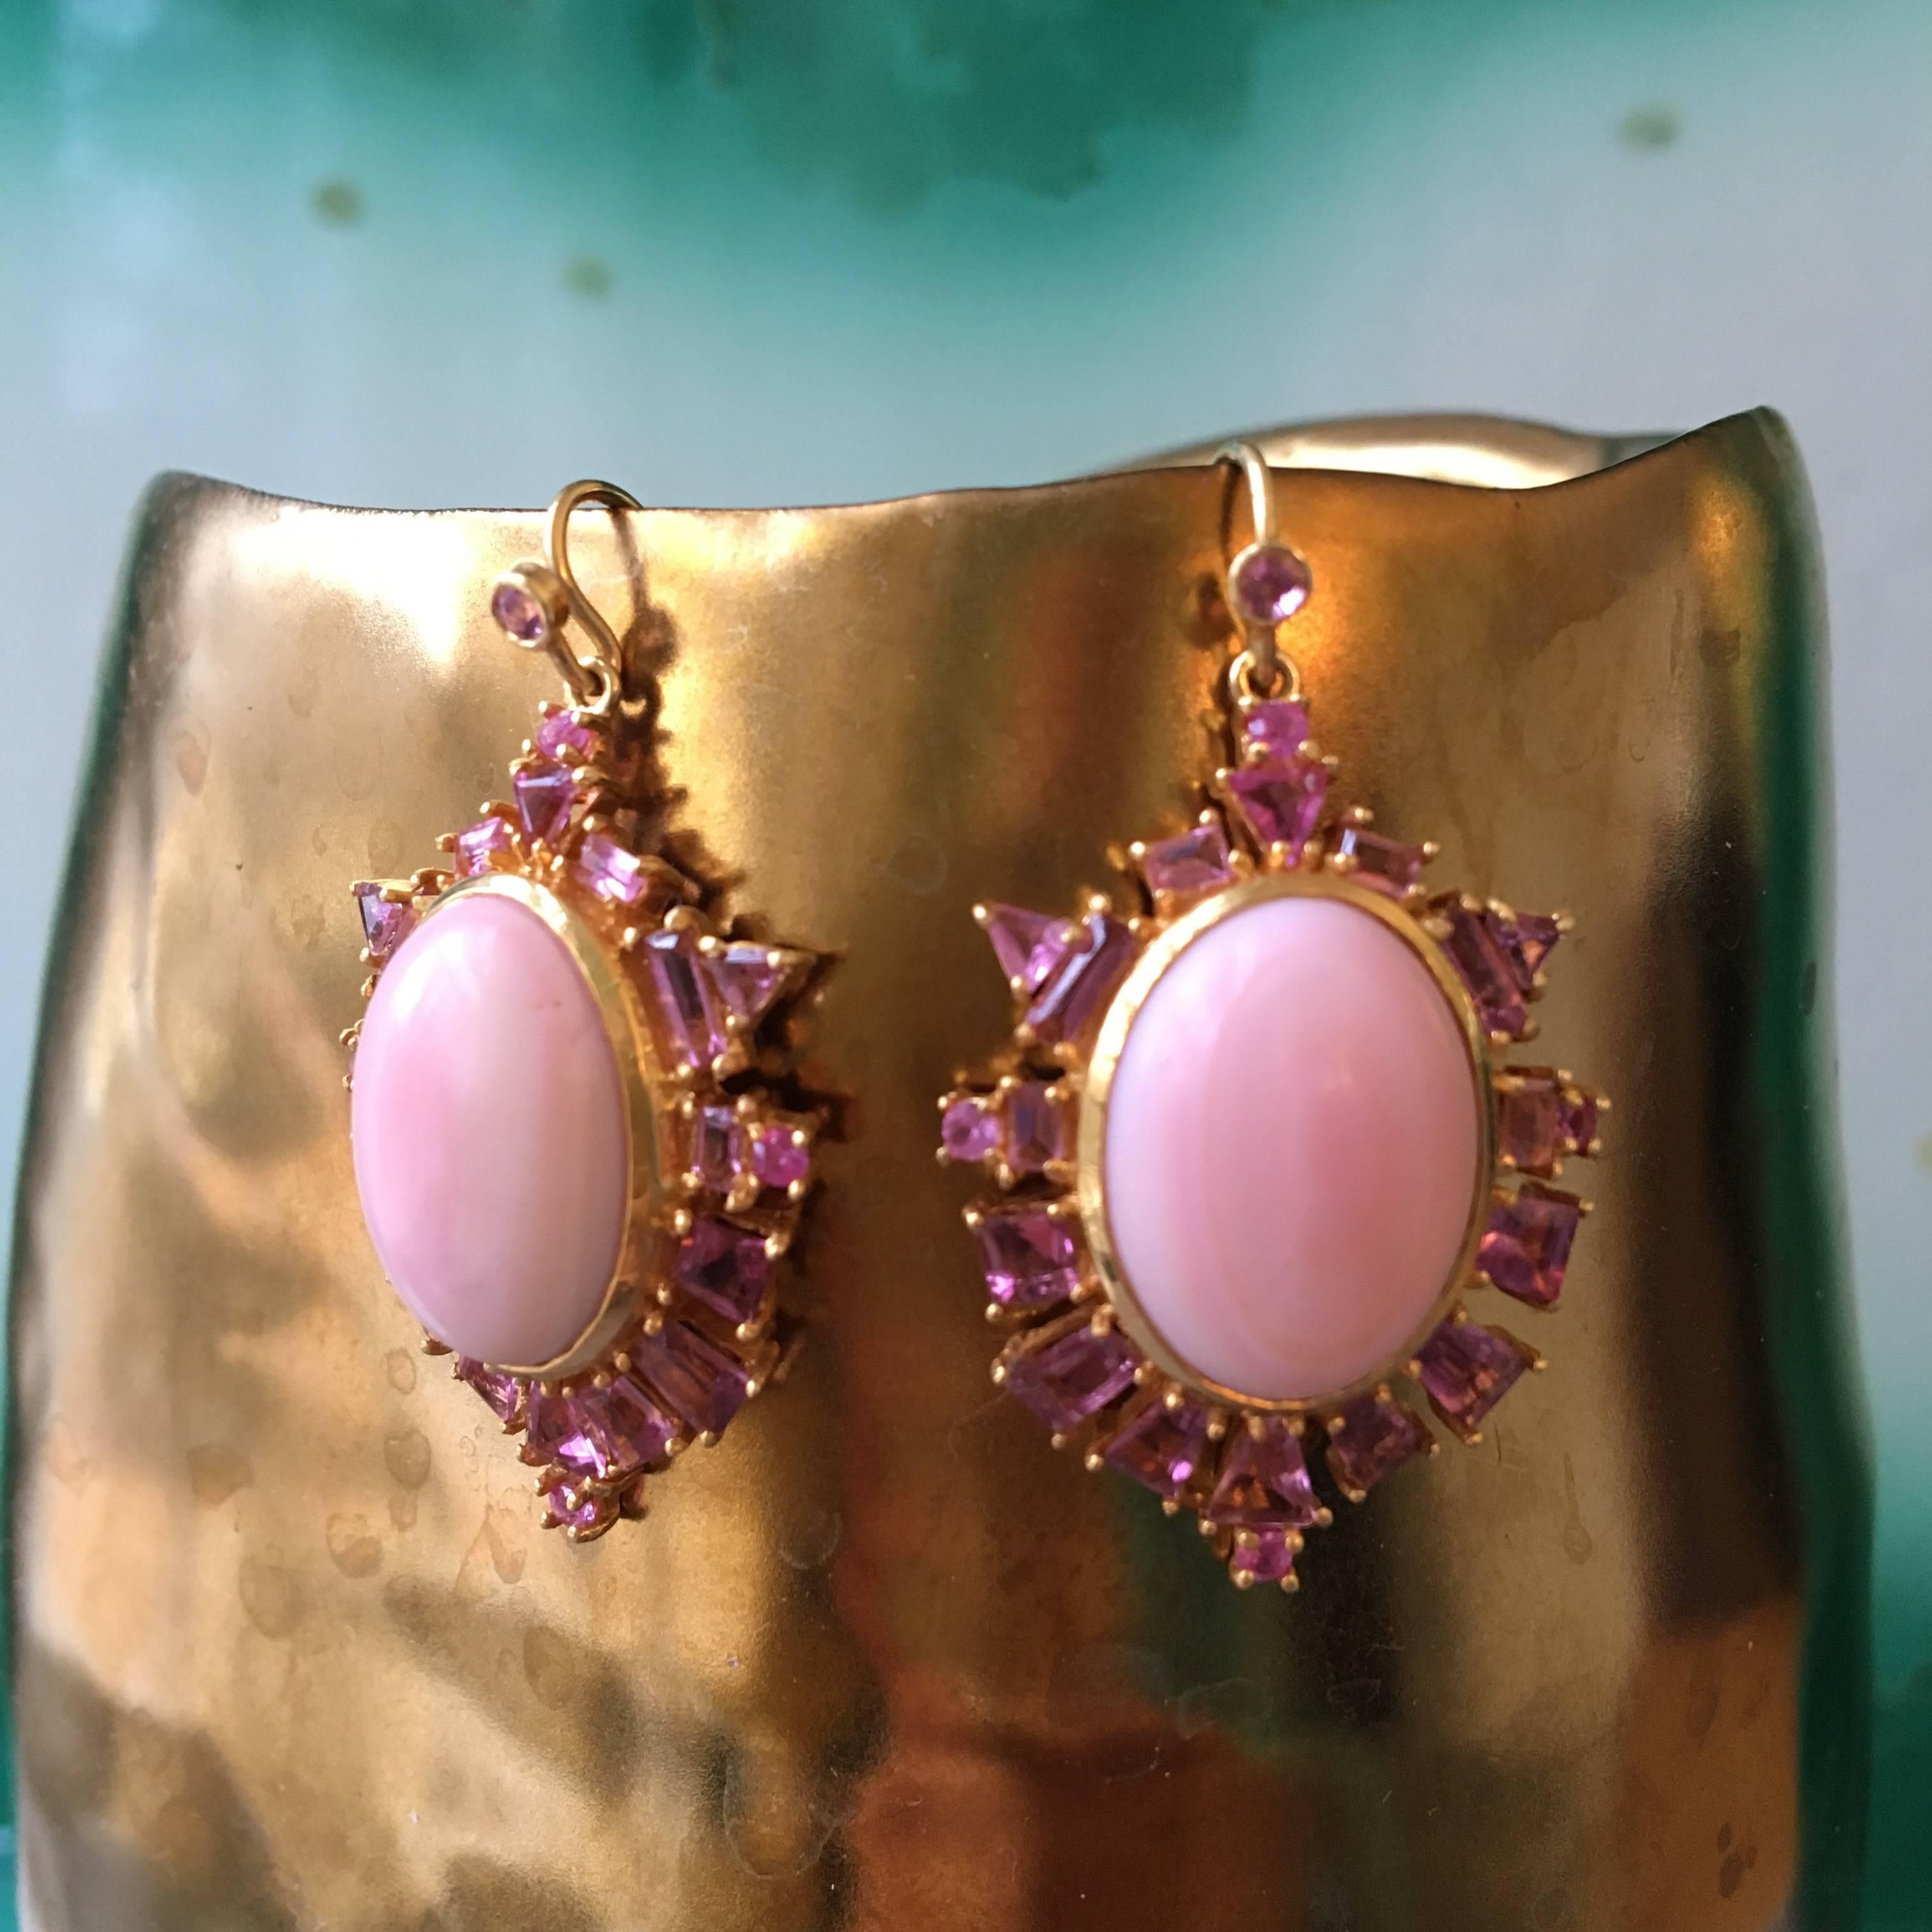 Feel like royalty in these beautiful pink opal and pink sapphire earrings!  Cabachon Pink Coral ovals are soft in color, but balanced with bright pink geometrically shaped Sapphires, creating a spectacular overall design.  Set in Lauren Harper's